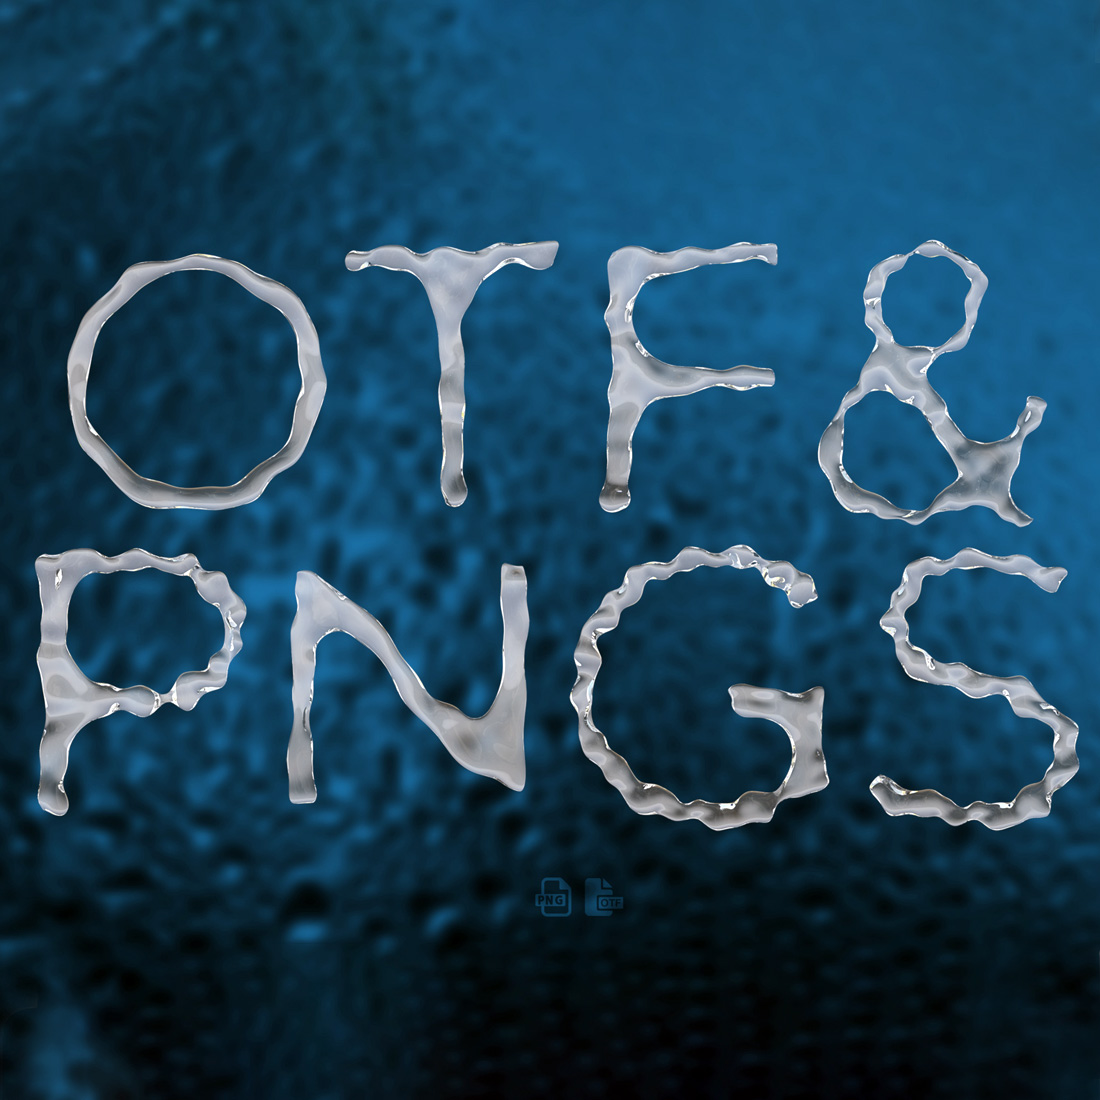 Font Opentype Ms Liquid SVG and PNG cover image.